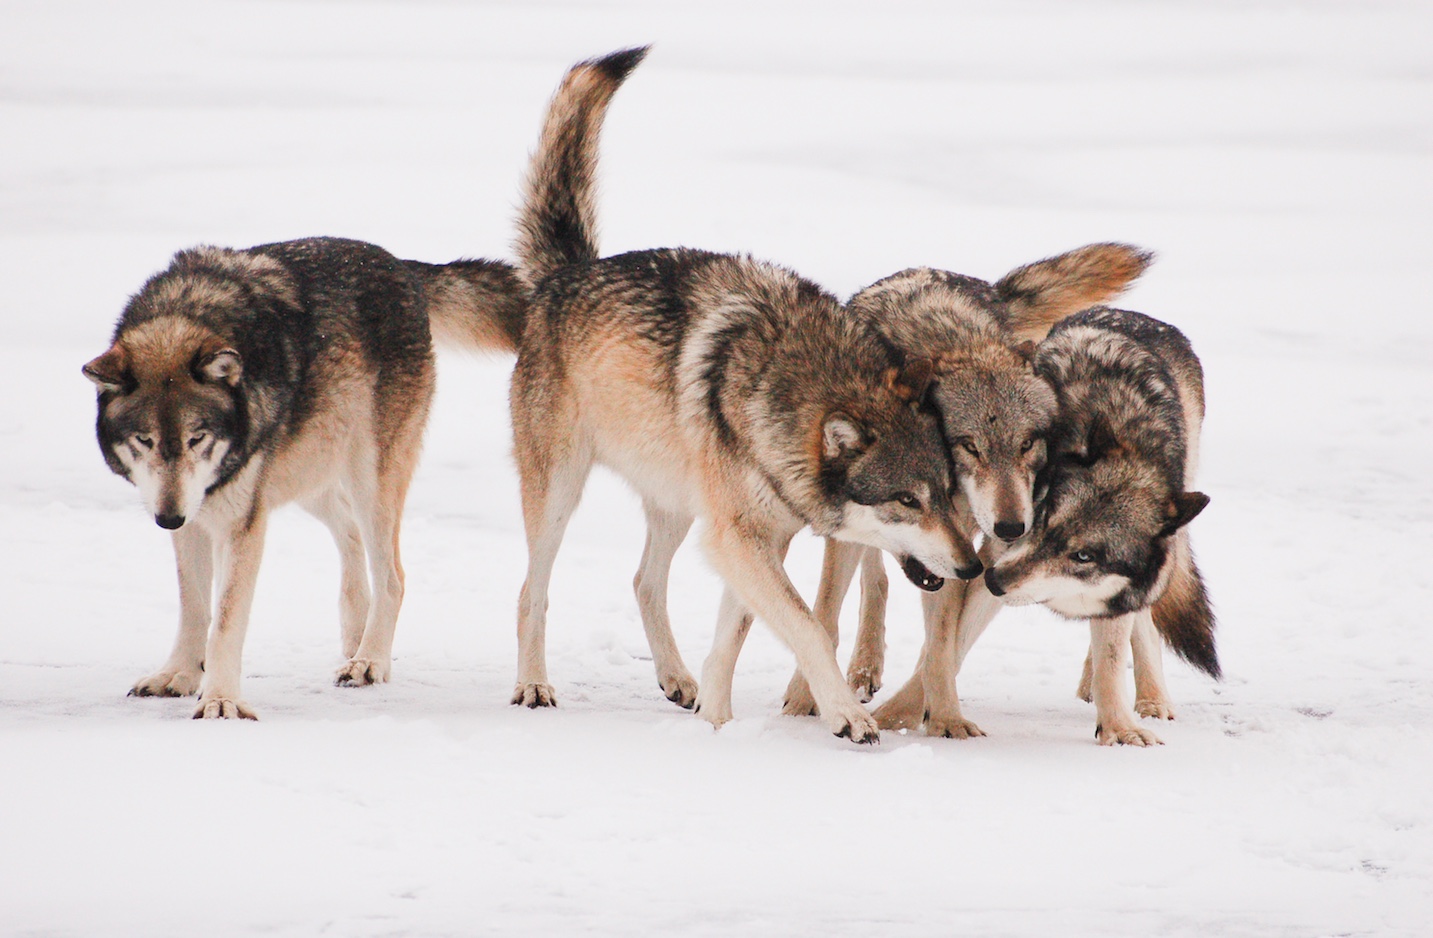 Wolf pack greeting each other in the snow.